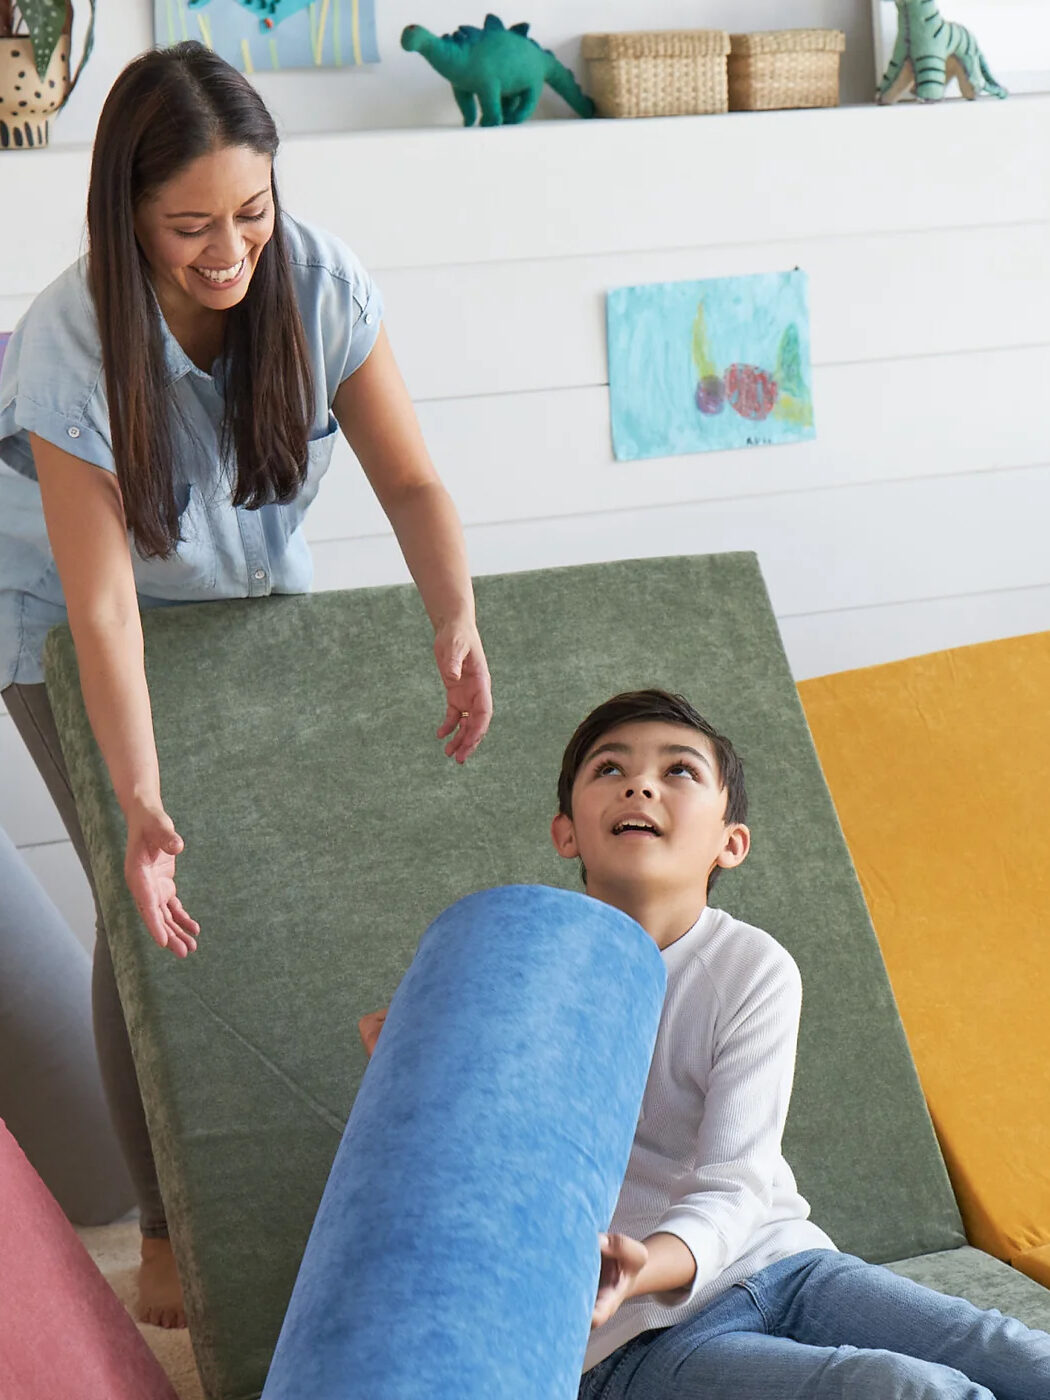 A woman leans over the back of a green play cushion and reaches for a blue cushion in a boy's arms